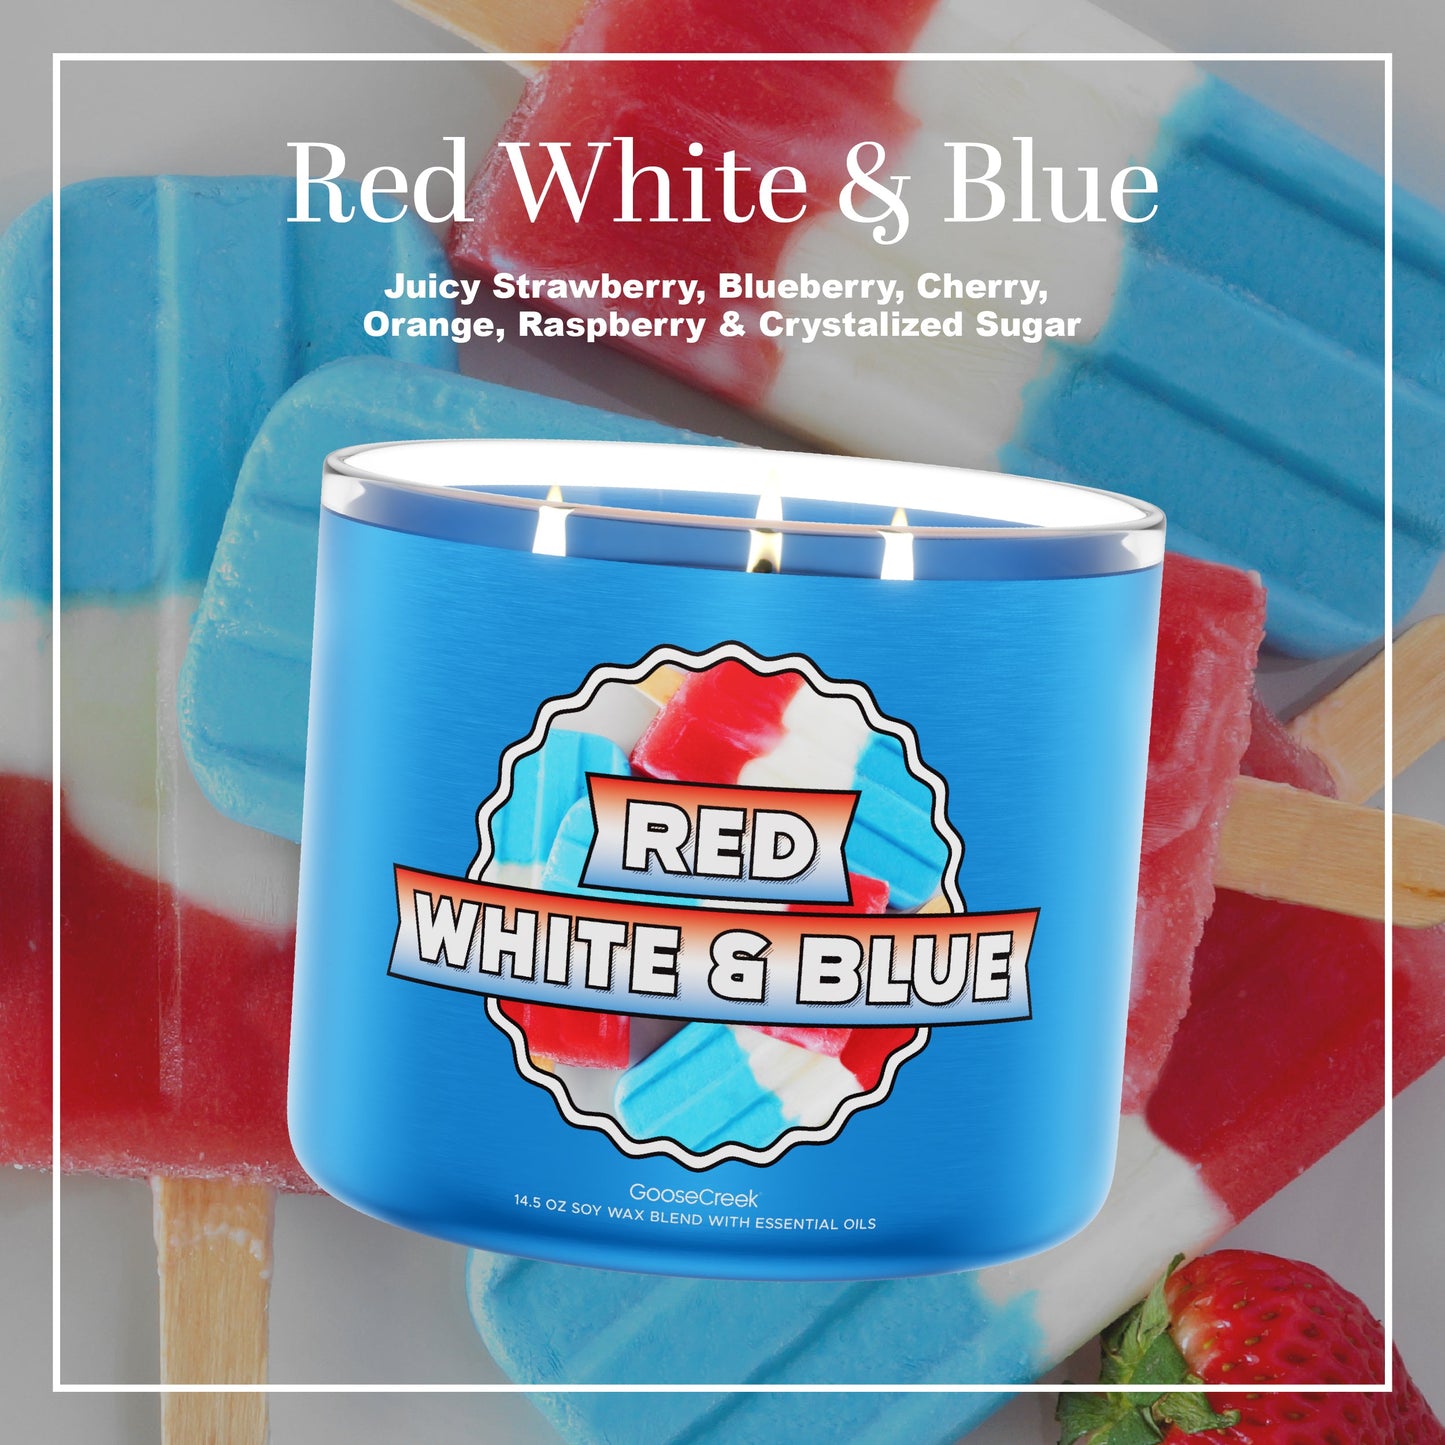 Red, White & Blue Large 3-Wick Candle